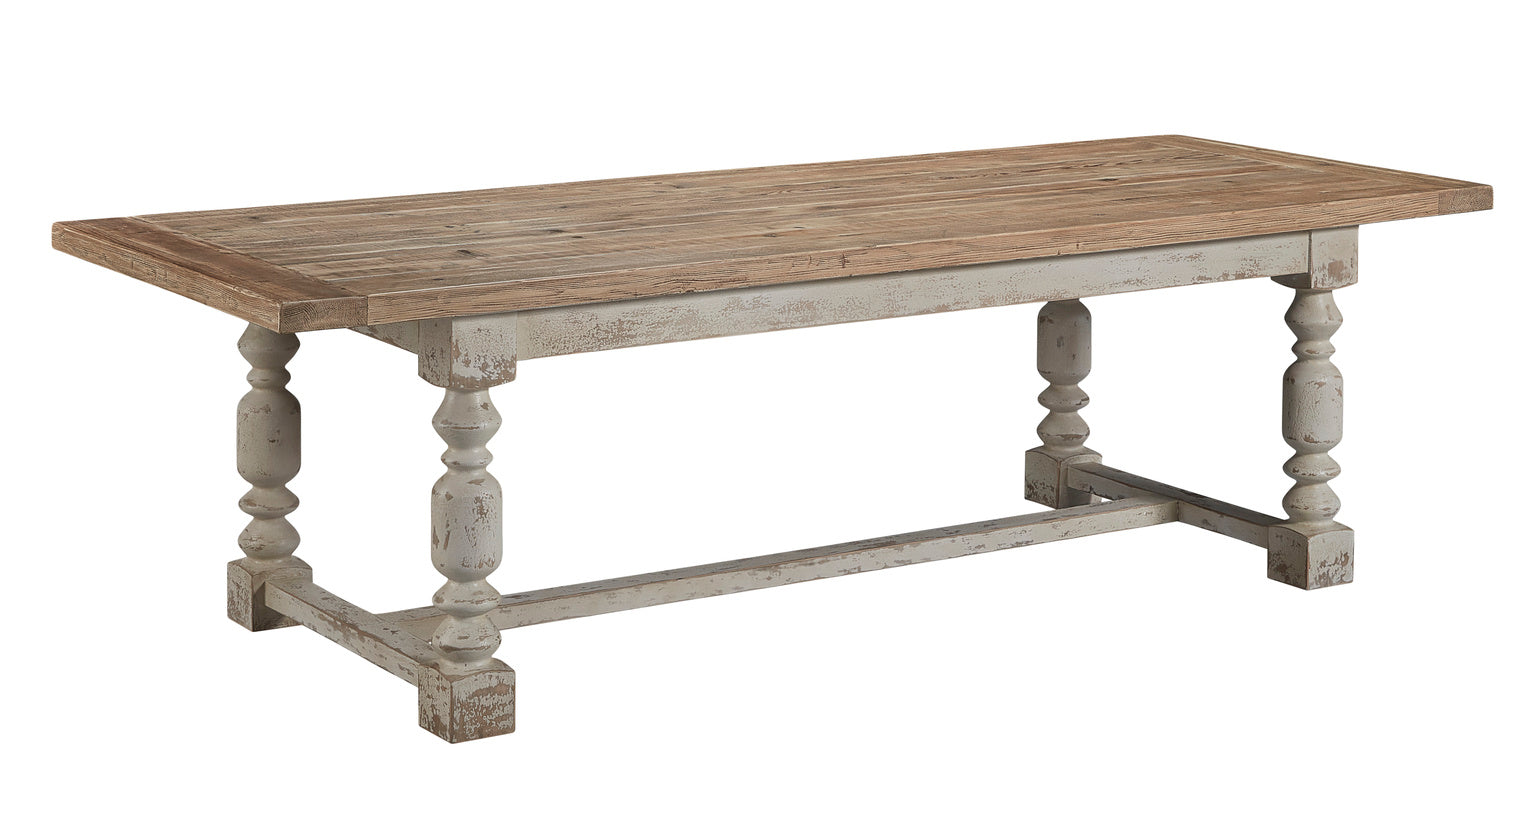 Twisted Dining Table  - 102" Farmhouse Pine Dining Table Breadboard Top